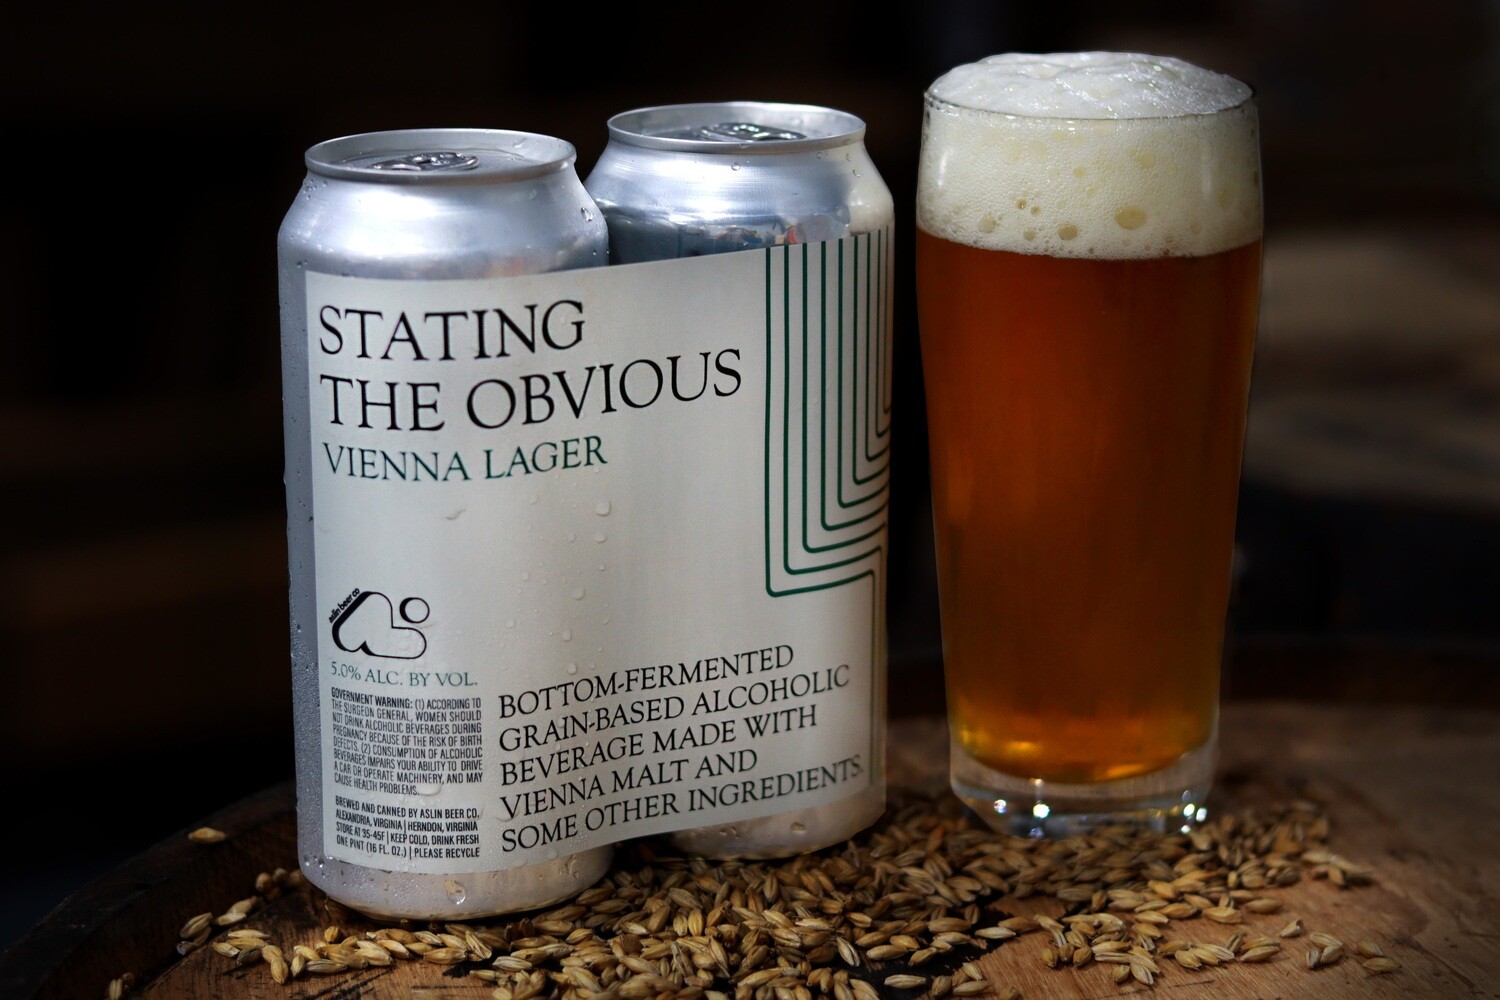 Stating The Obvious VIENNA LAGER (4-pack)